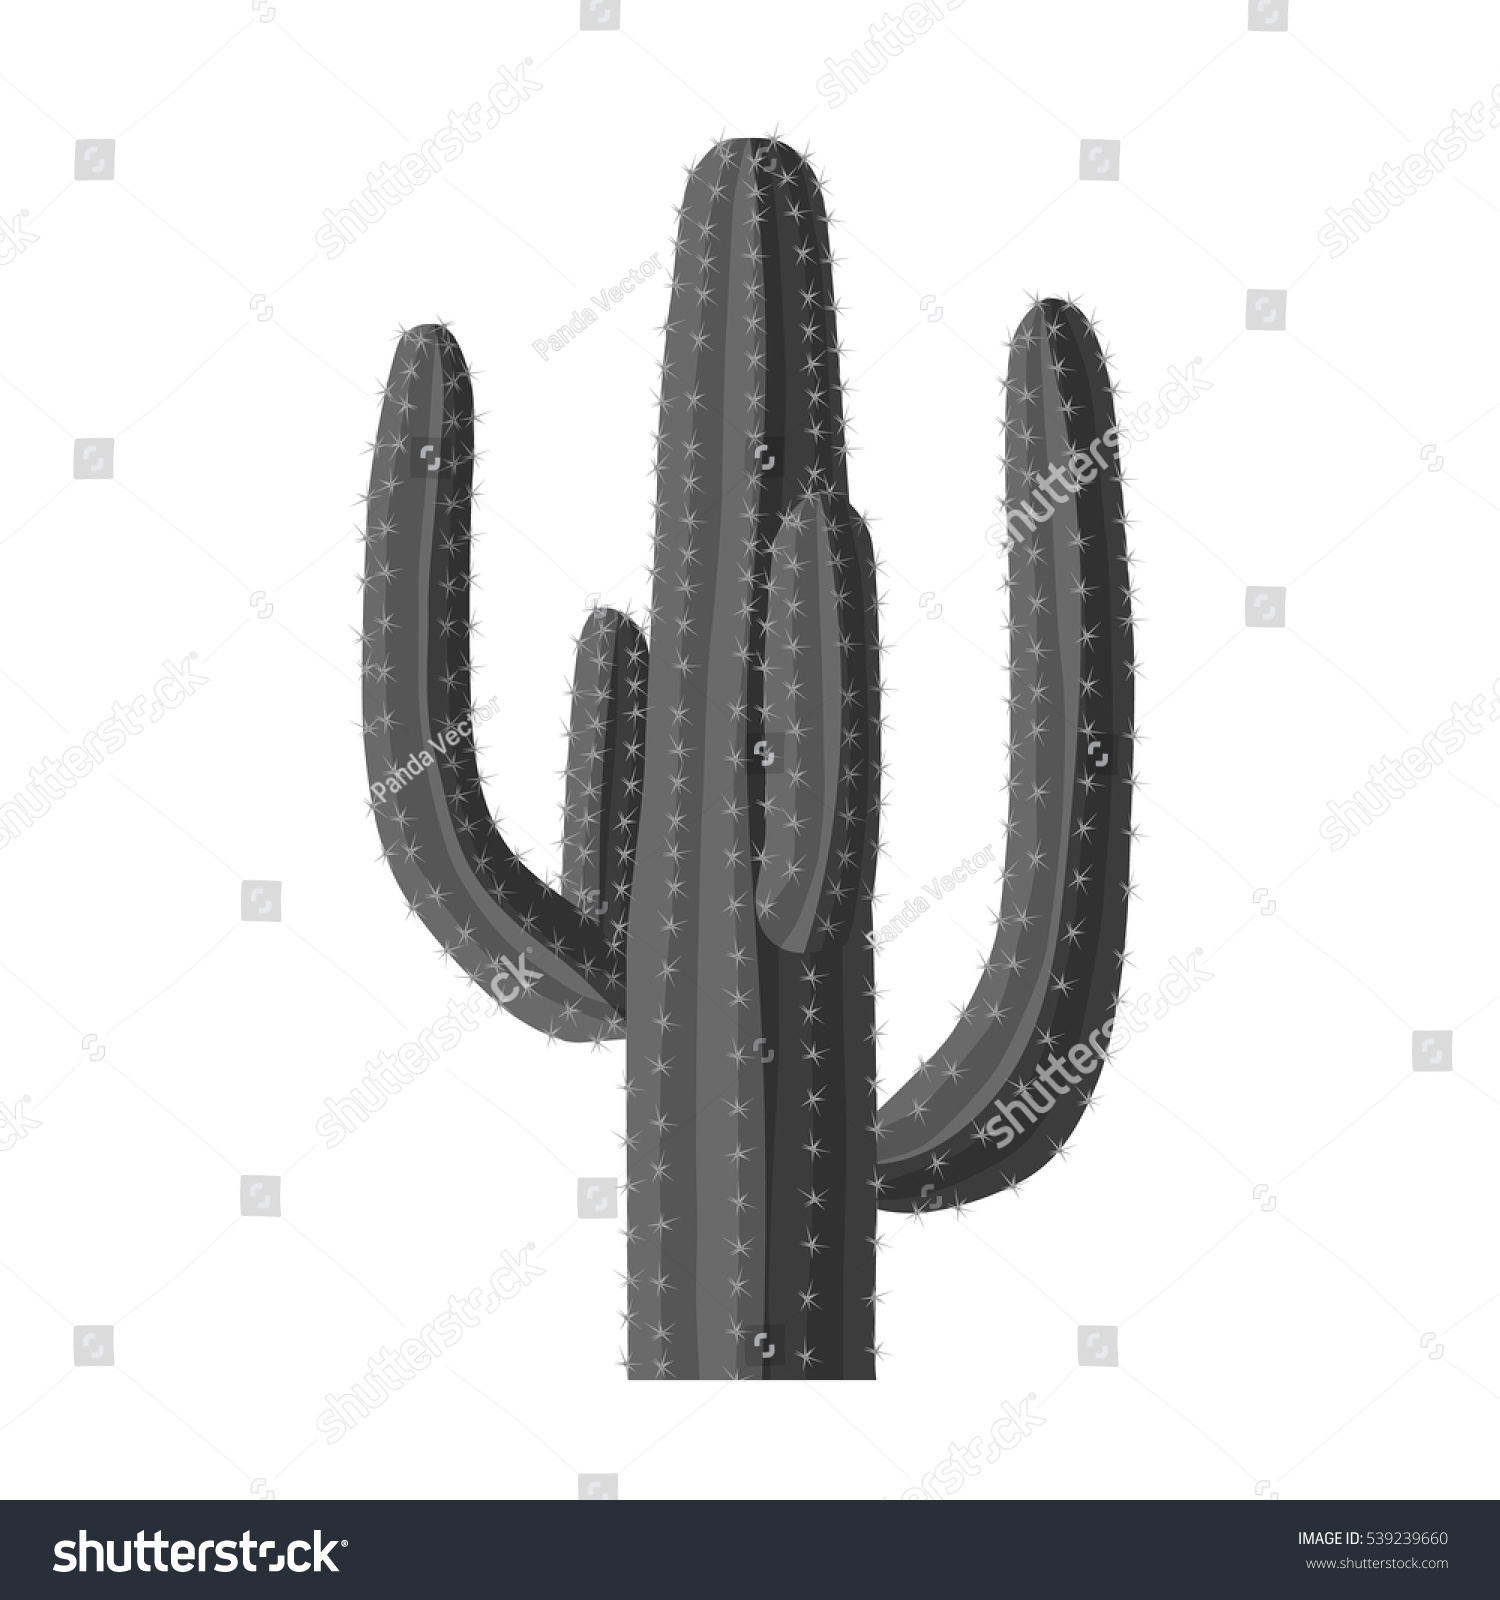 SVG of Mexican cactus icon in monochrome style isolated on white background. Mexico country symbol stock vector illustration. svg